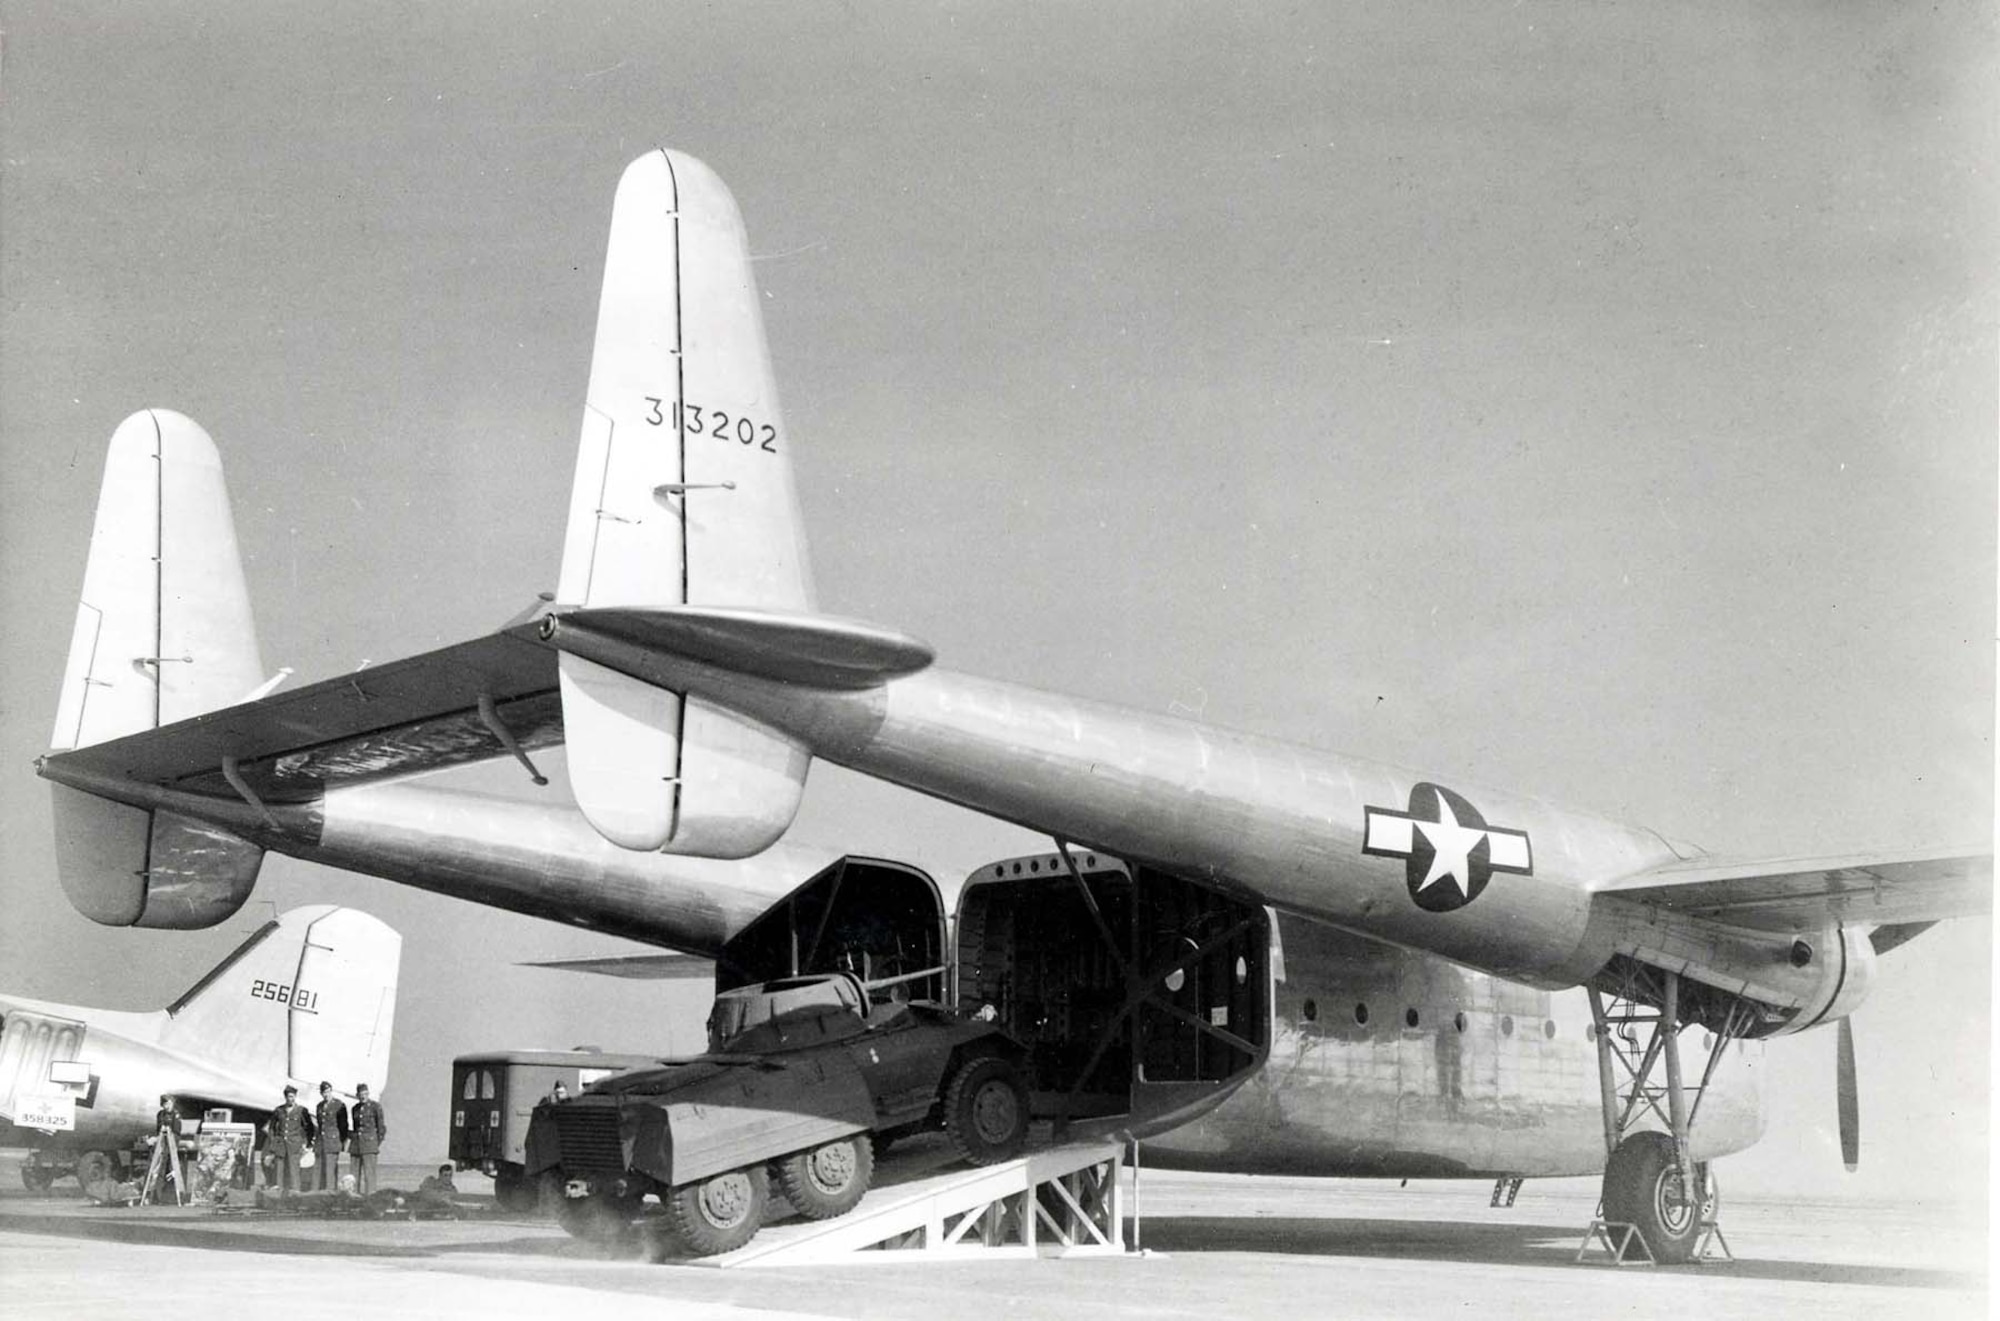 With its rear, clamshell doors opened wide, the C-82 displays its ability to load heavy cargo easily and quickly during a demonstration in October 1944. (U.S. Air Force photo)